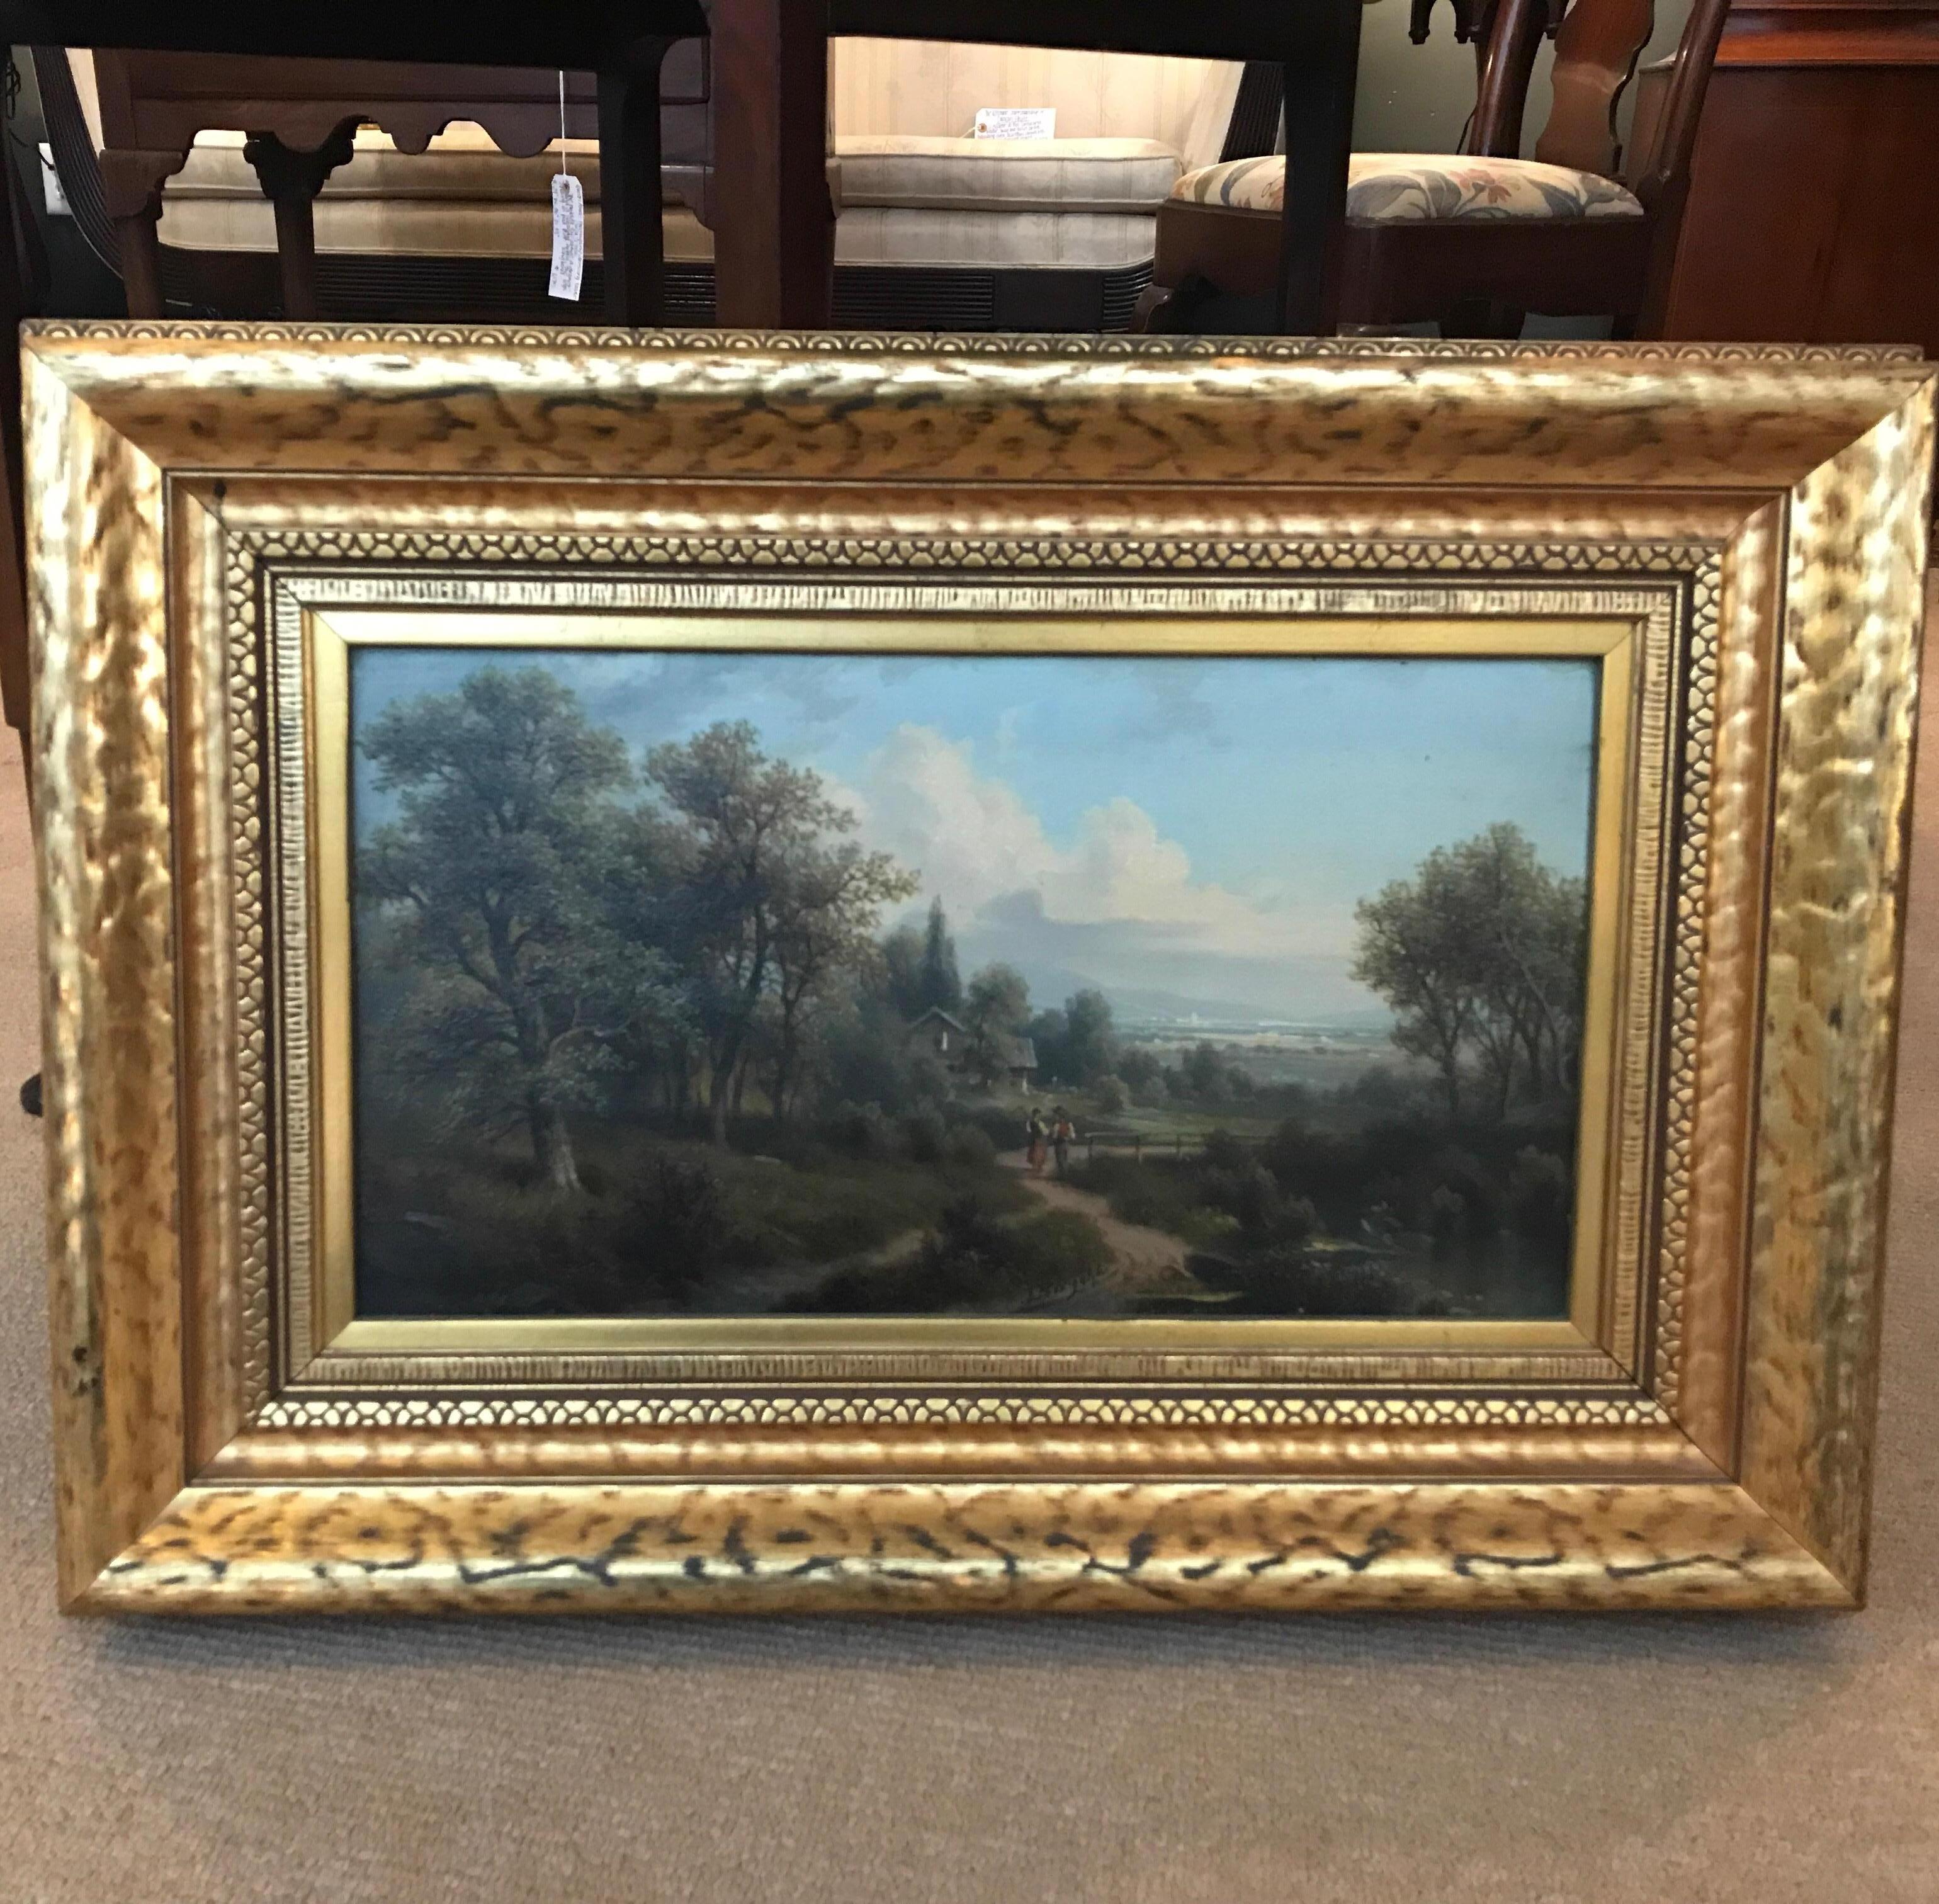 Stunning 19th century bucolic scene in original giltwood frame. The original oil painting is artist signed on the lower right 'J. Baugahman